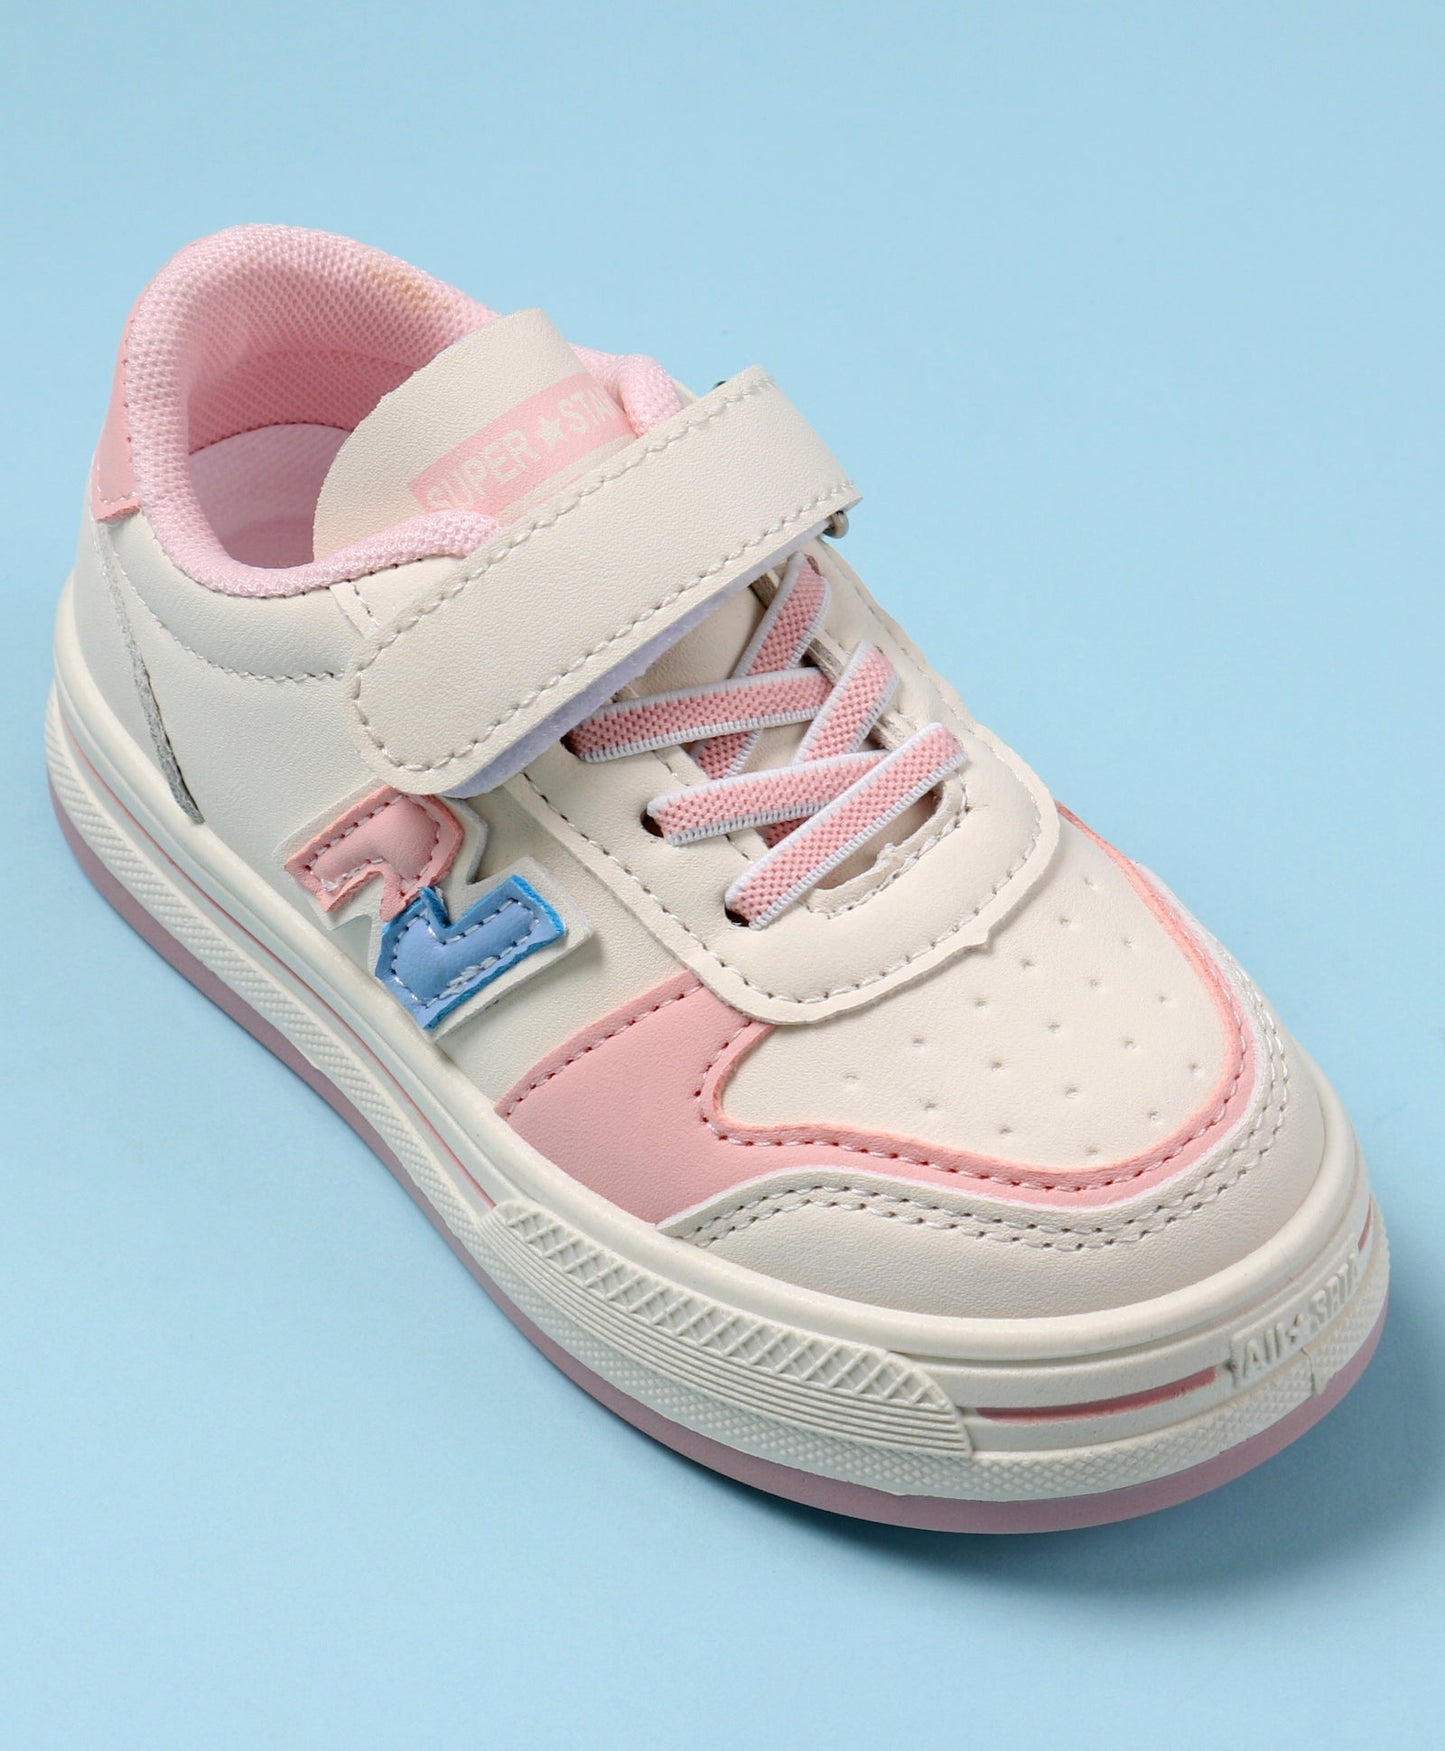 N PATCH VELCRO CLOSURE SNEAKERS - WHITE & PINK